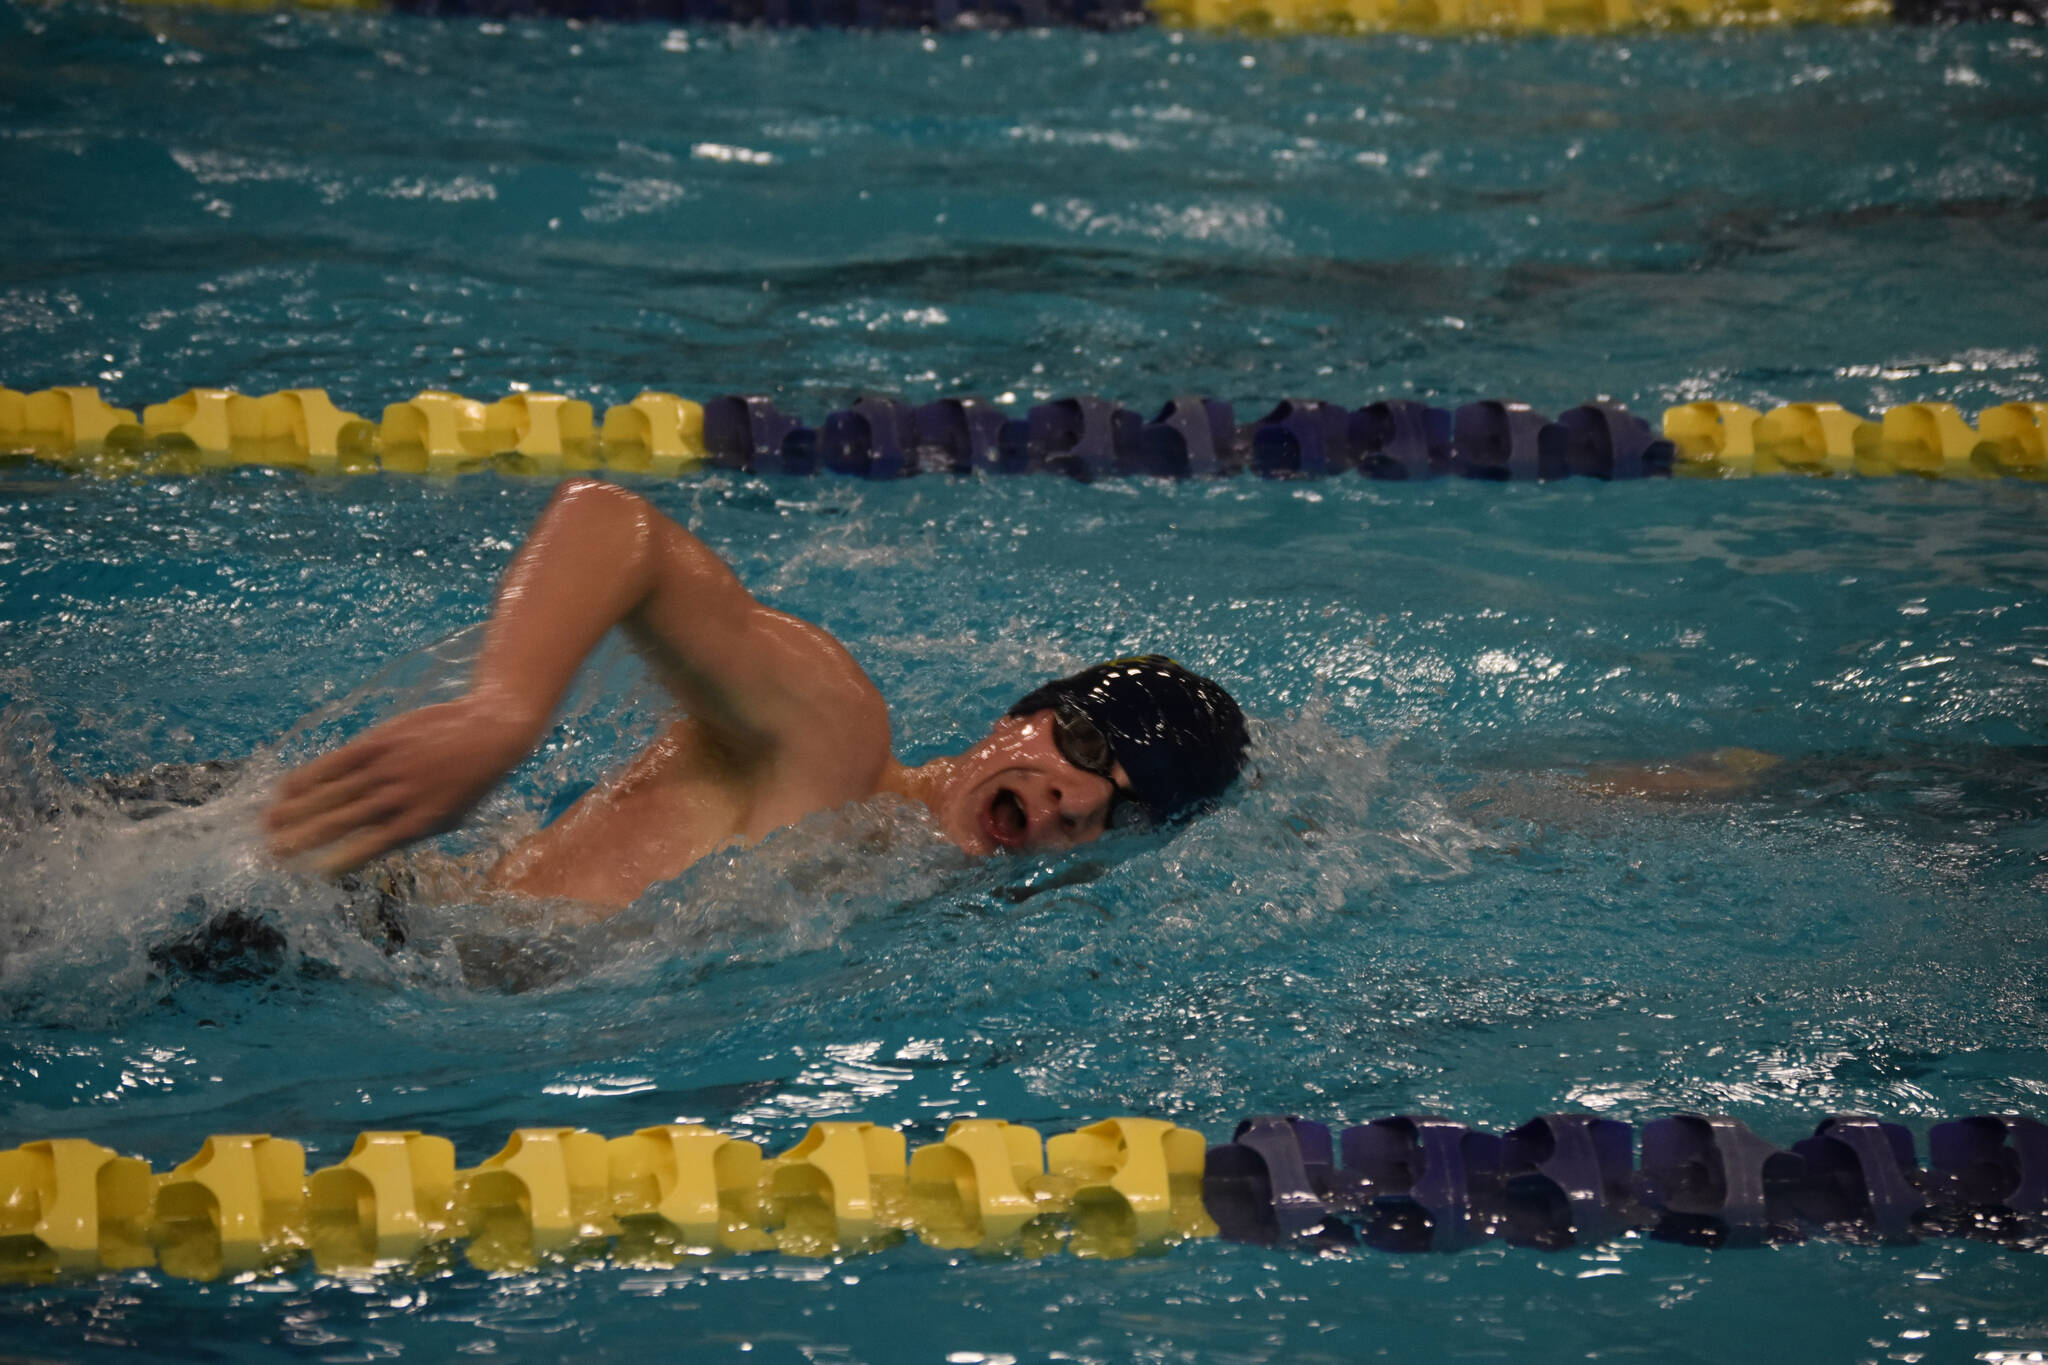 Hunter Fry, of Homer, swims the 500 yard freestyle during finals at the ASAA State Swim & Dive Championships on Saturday, Nov. 5, 2022, at Bartlett High School in Anchorage, Alaska. (Jake Dye/Peninsula Clarion)